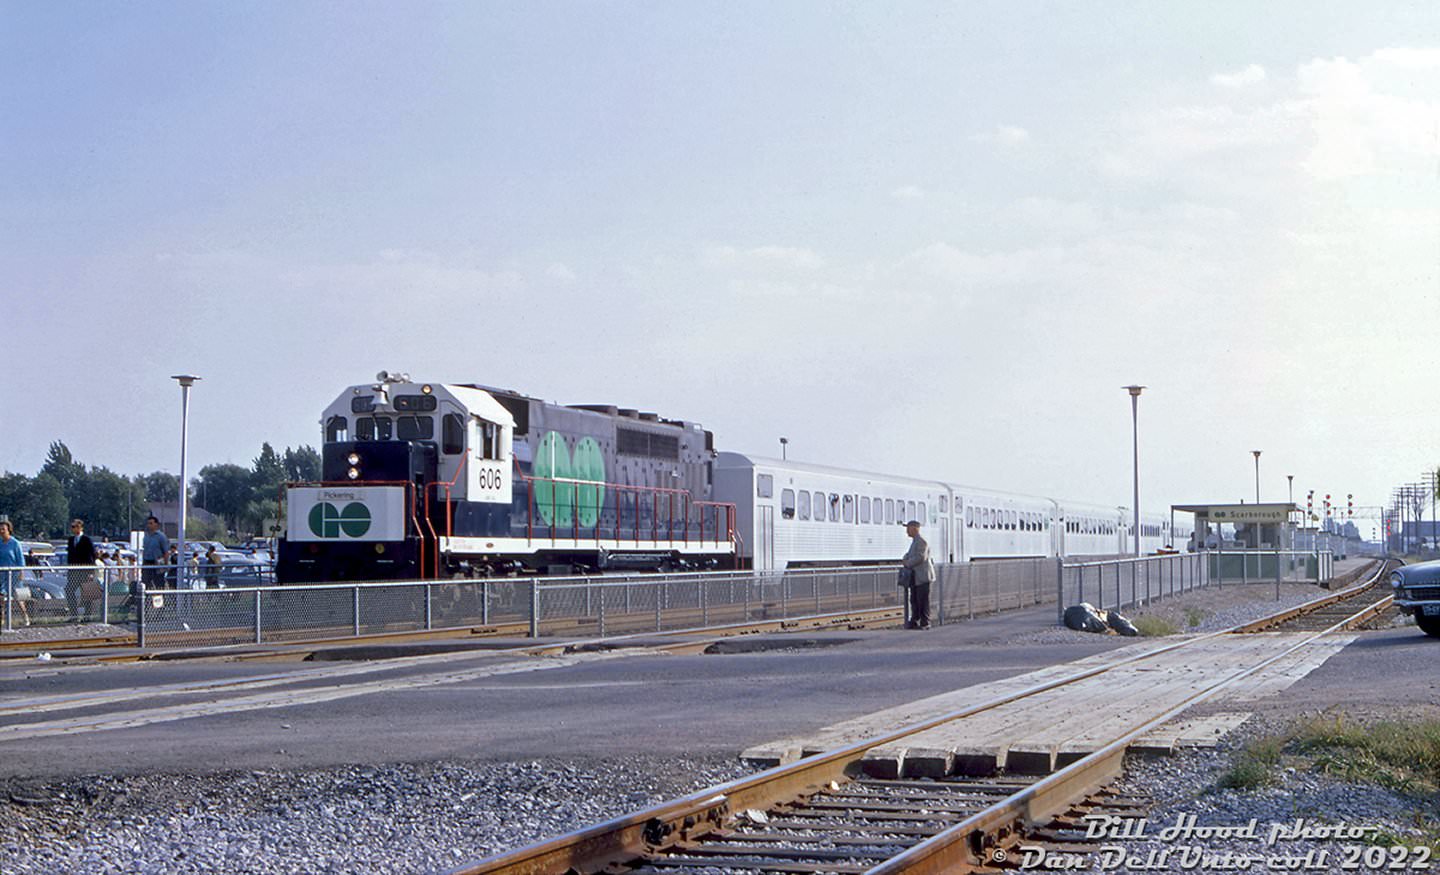 GO locomotive GP40TC #606 heads an eastbound train out of Scarborough GO station about to cross the busy St. Clair Ave. E. grade crossing in September of 1967, during the first few months of GO train operation.